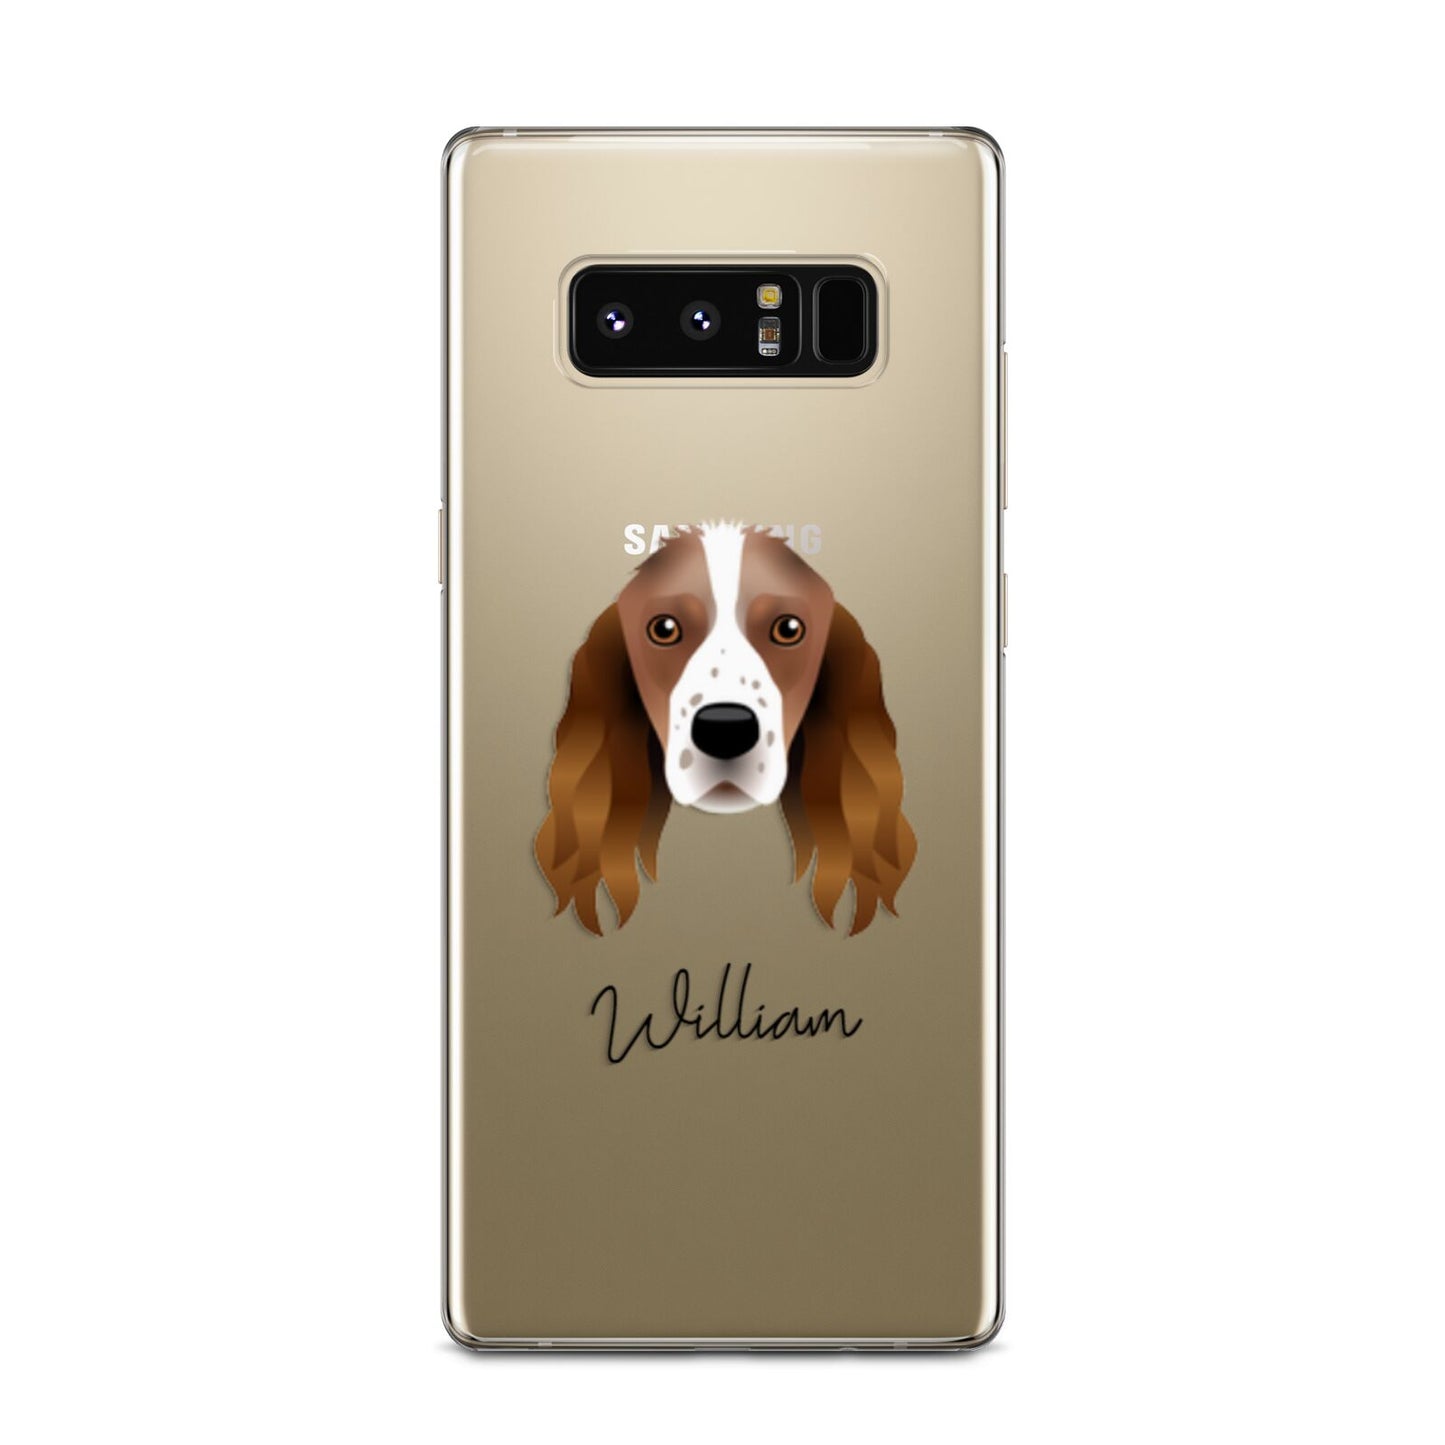 Springer Spaniel Personalised Samsung Galaxy Note 8 Case